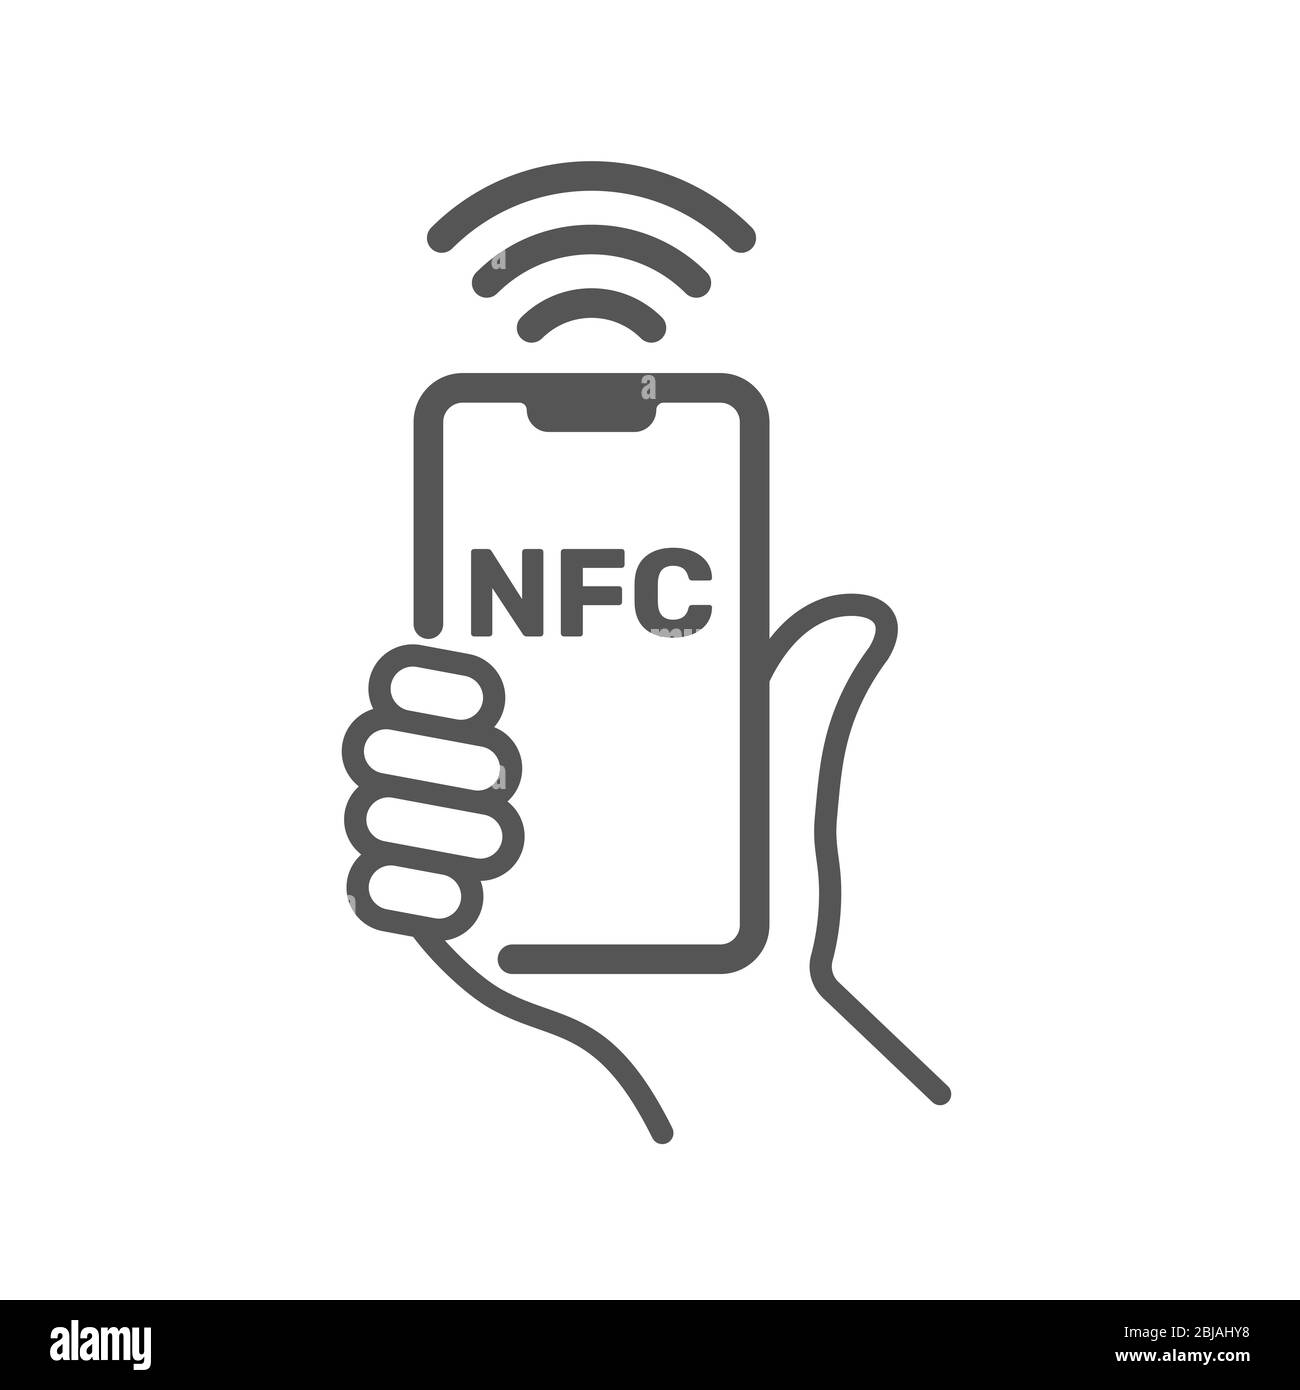 Near field communication, NFC mobile phone, NFC payment with mobile phone smartphone flat vector icon for apps and websites Stock Vector